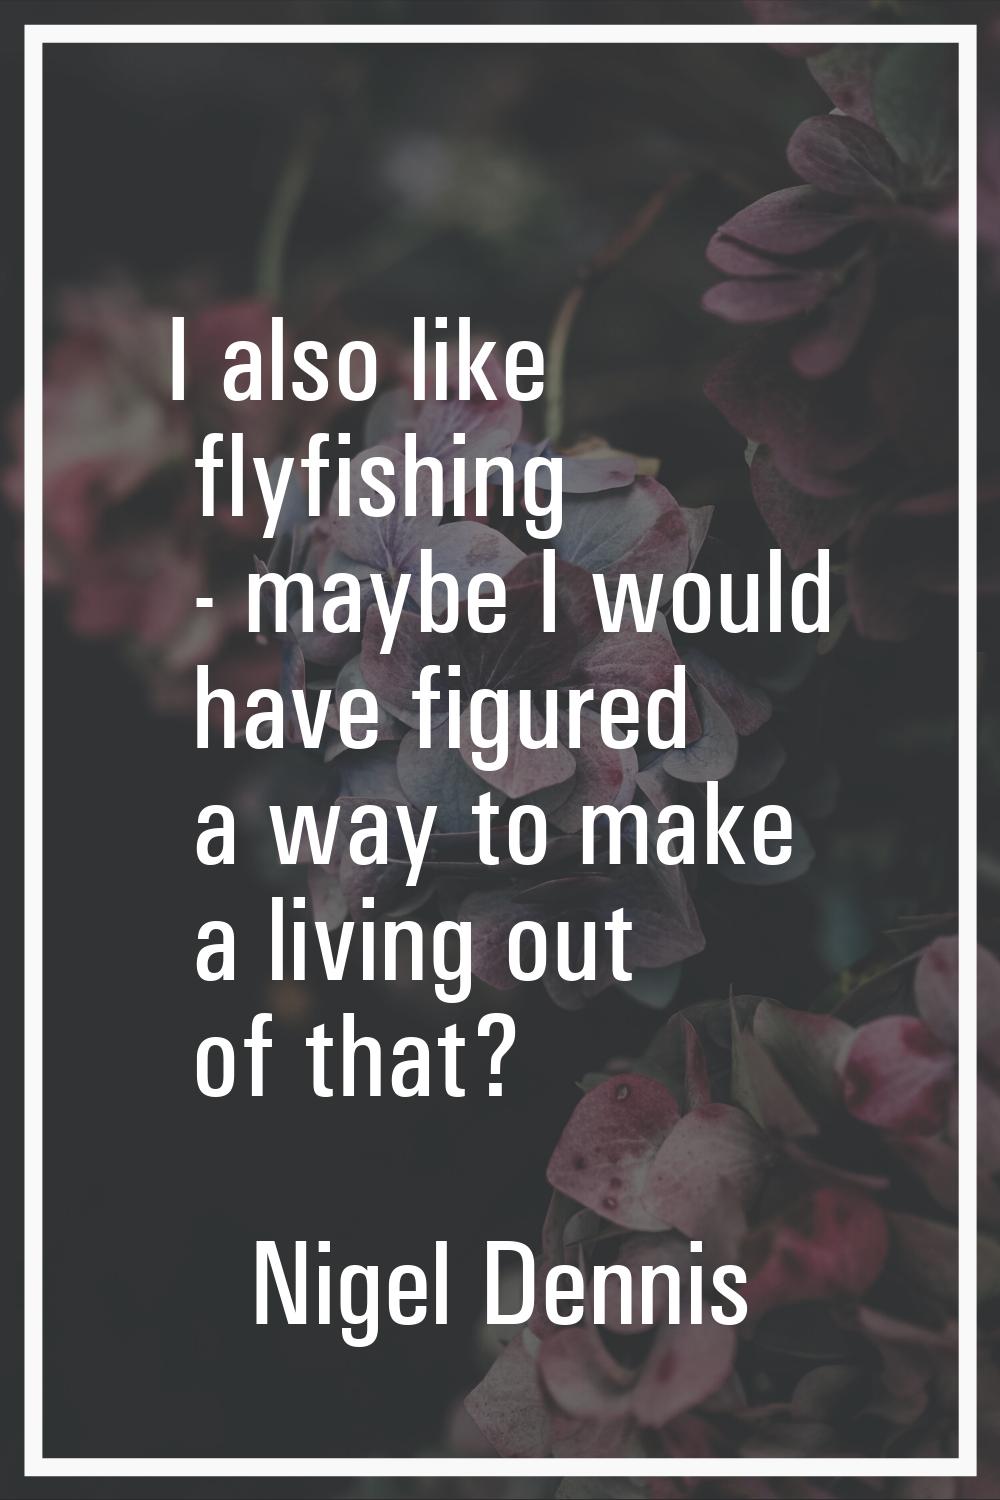 I also like flyfishing - maybe I would have figured a way to make a living out of that?